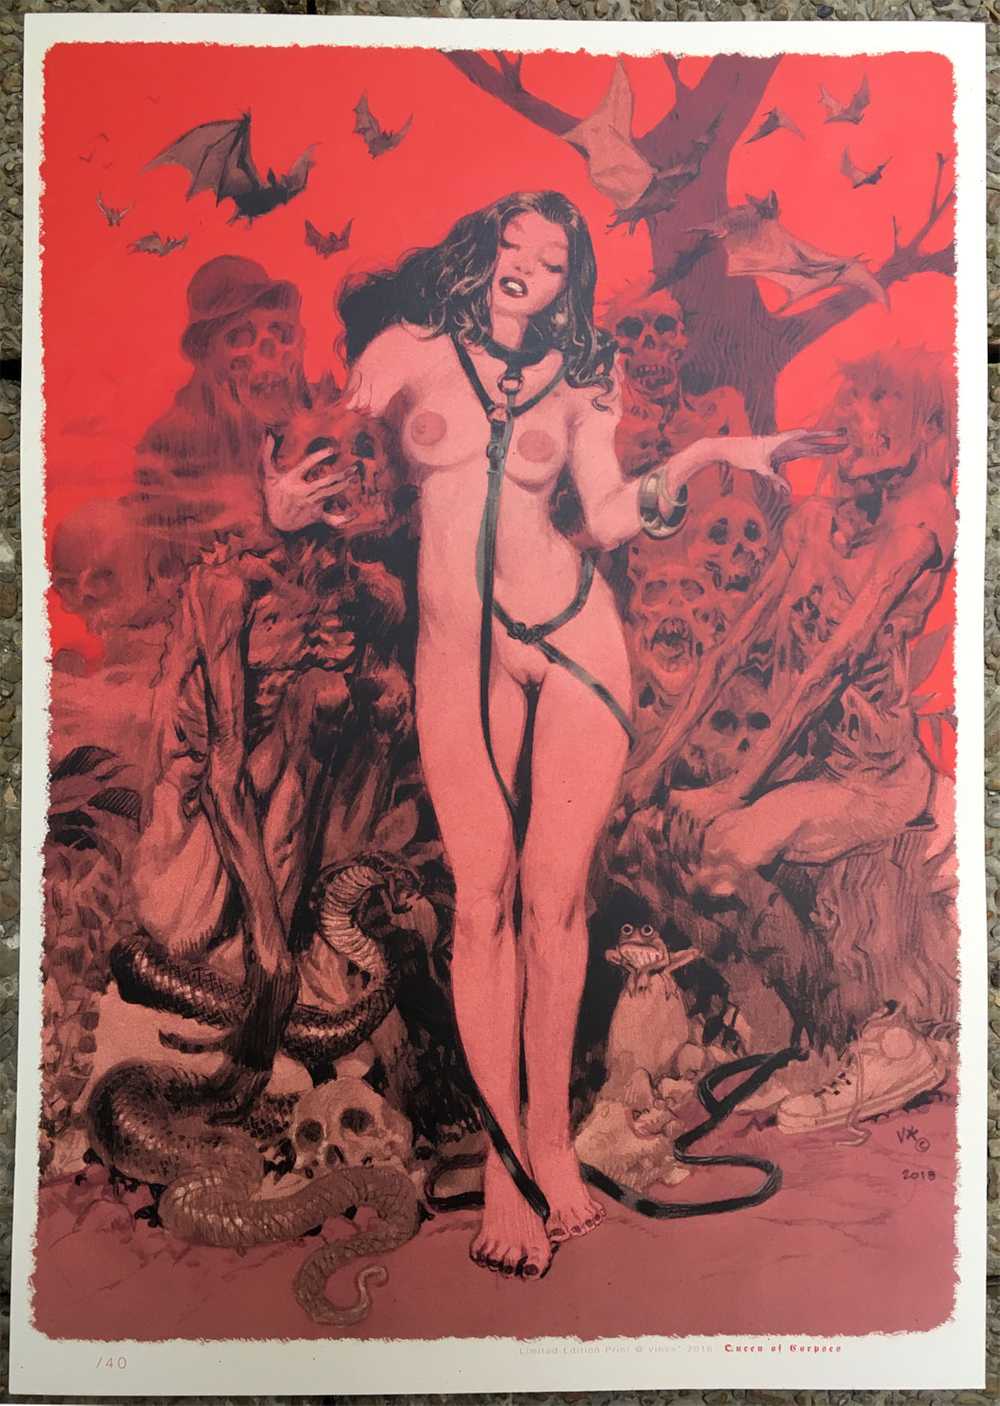 The Queen of Corpses - Signed & Numbered Print